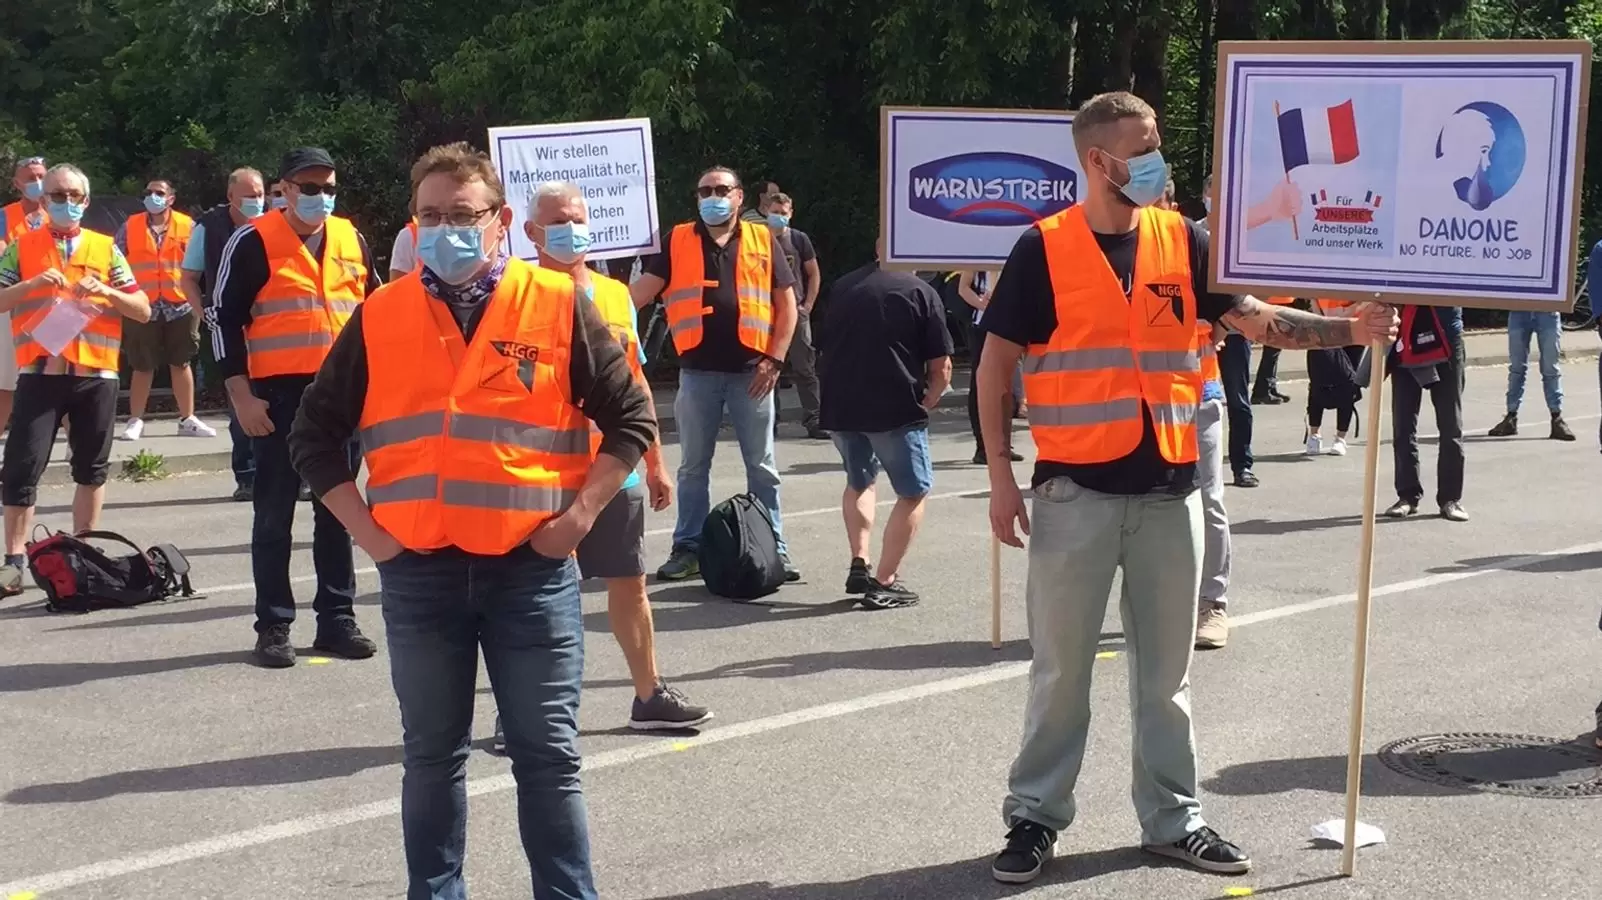 Featured image for - Plant closure in Rosenheim Germany: Danone workers stage a warning strike